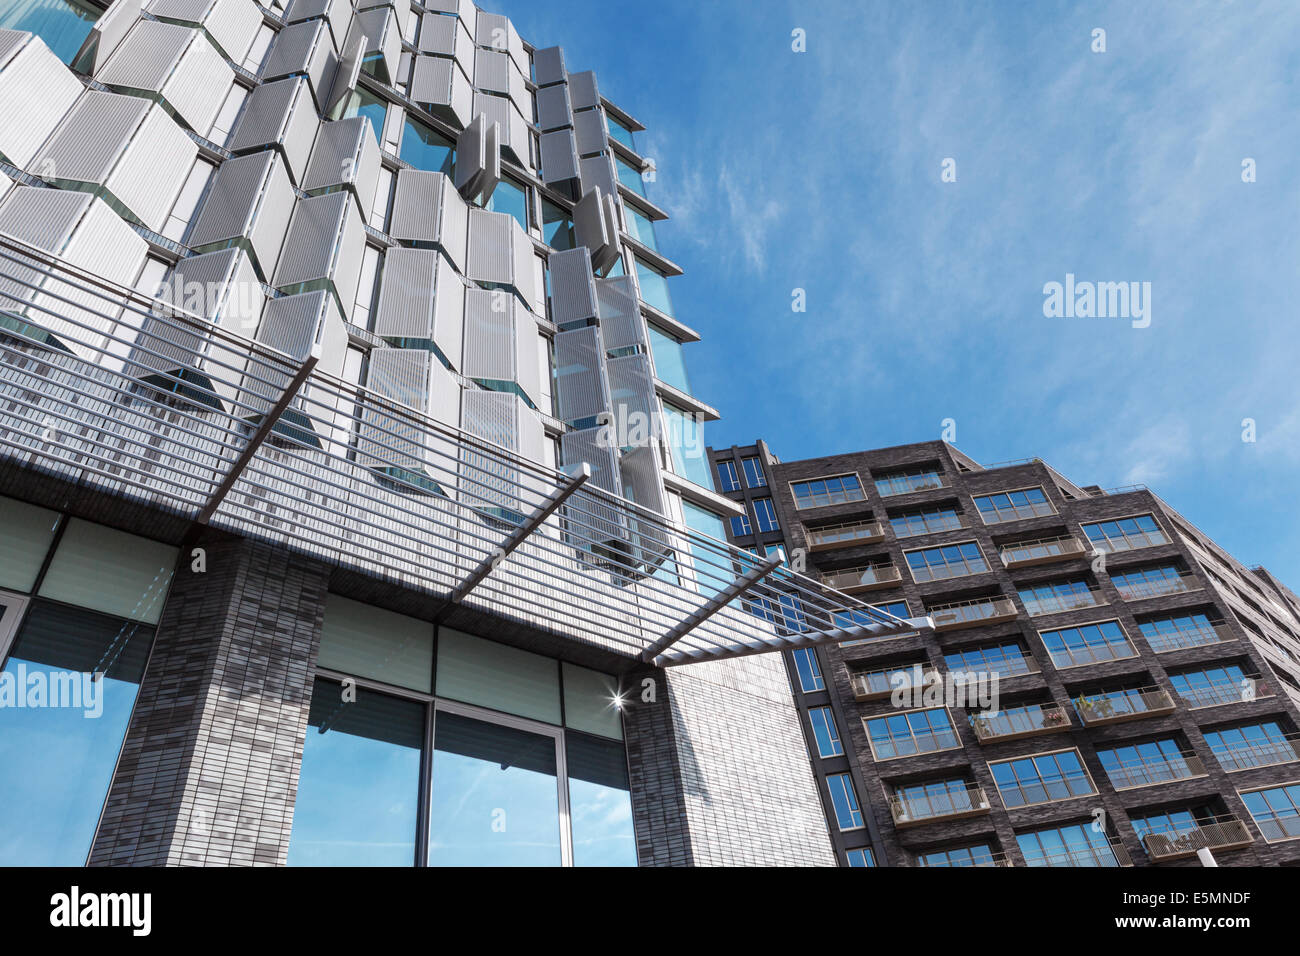 Amsterdam, the Netherlands - October 16, 2013: Design of modern buildings faces, example of modern architecture. Stock Photo